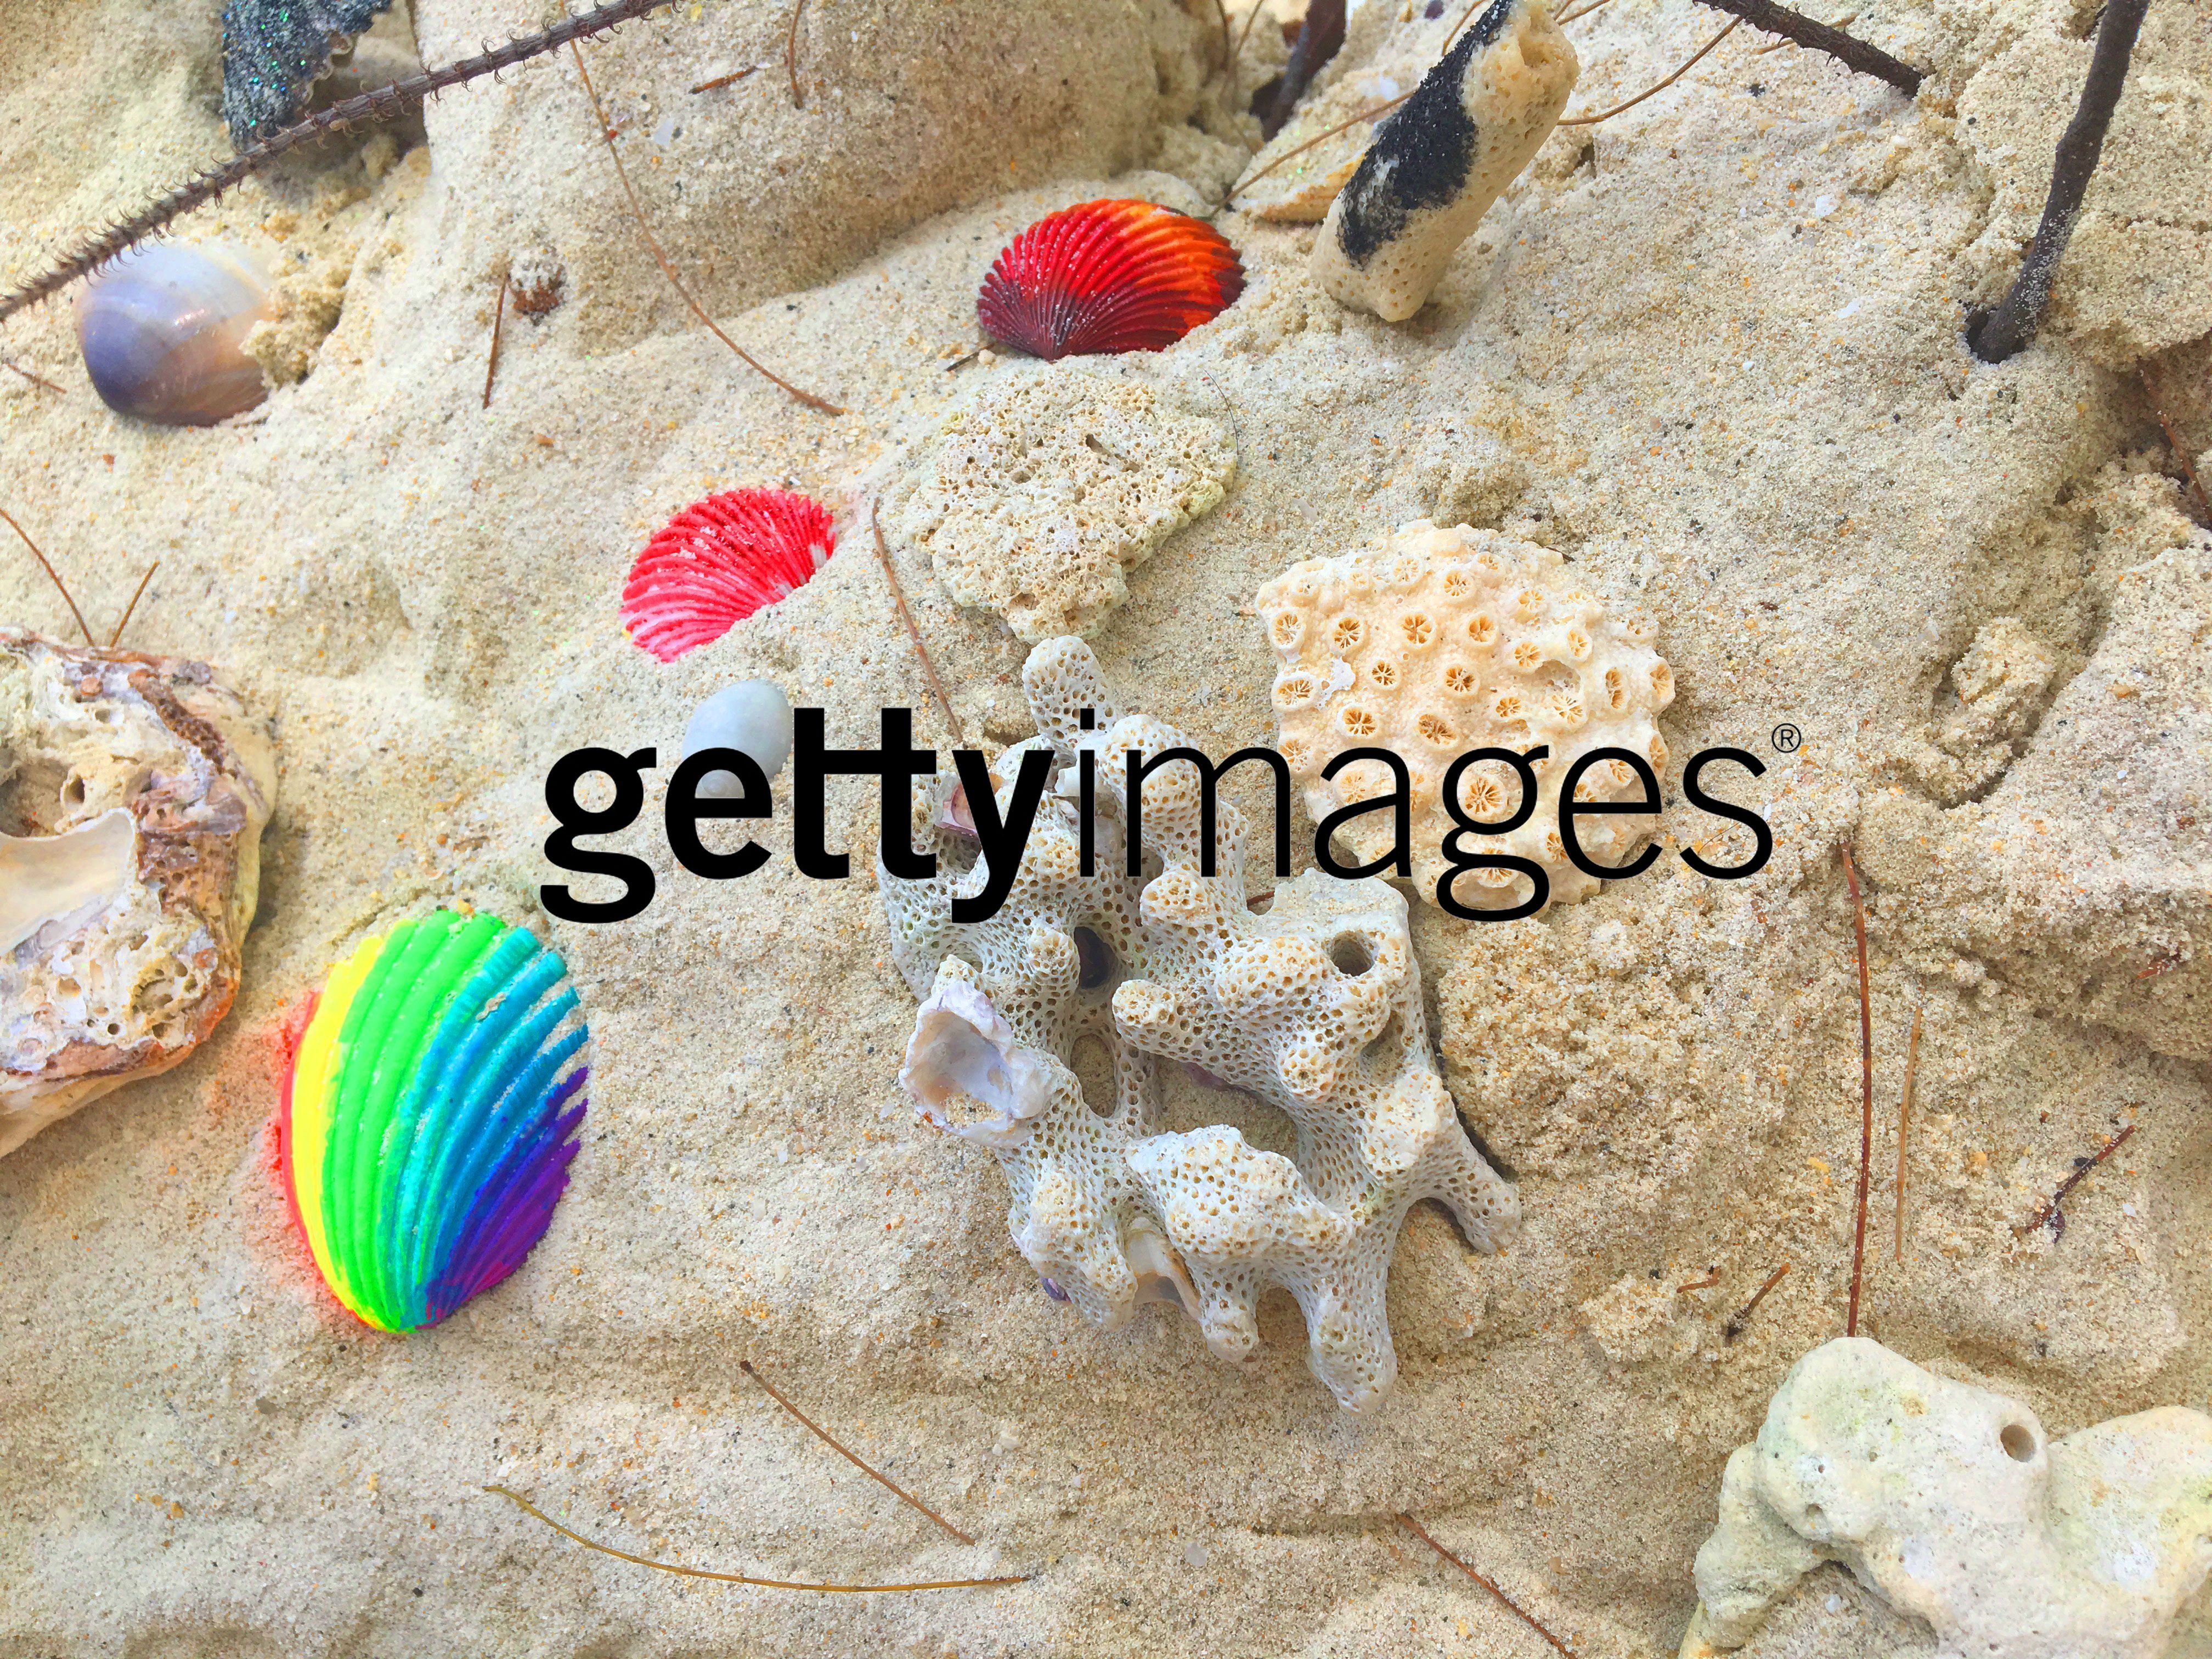 Getty Images Watermark Remover | Free Download.